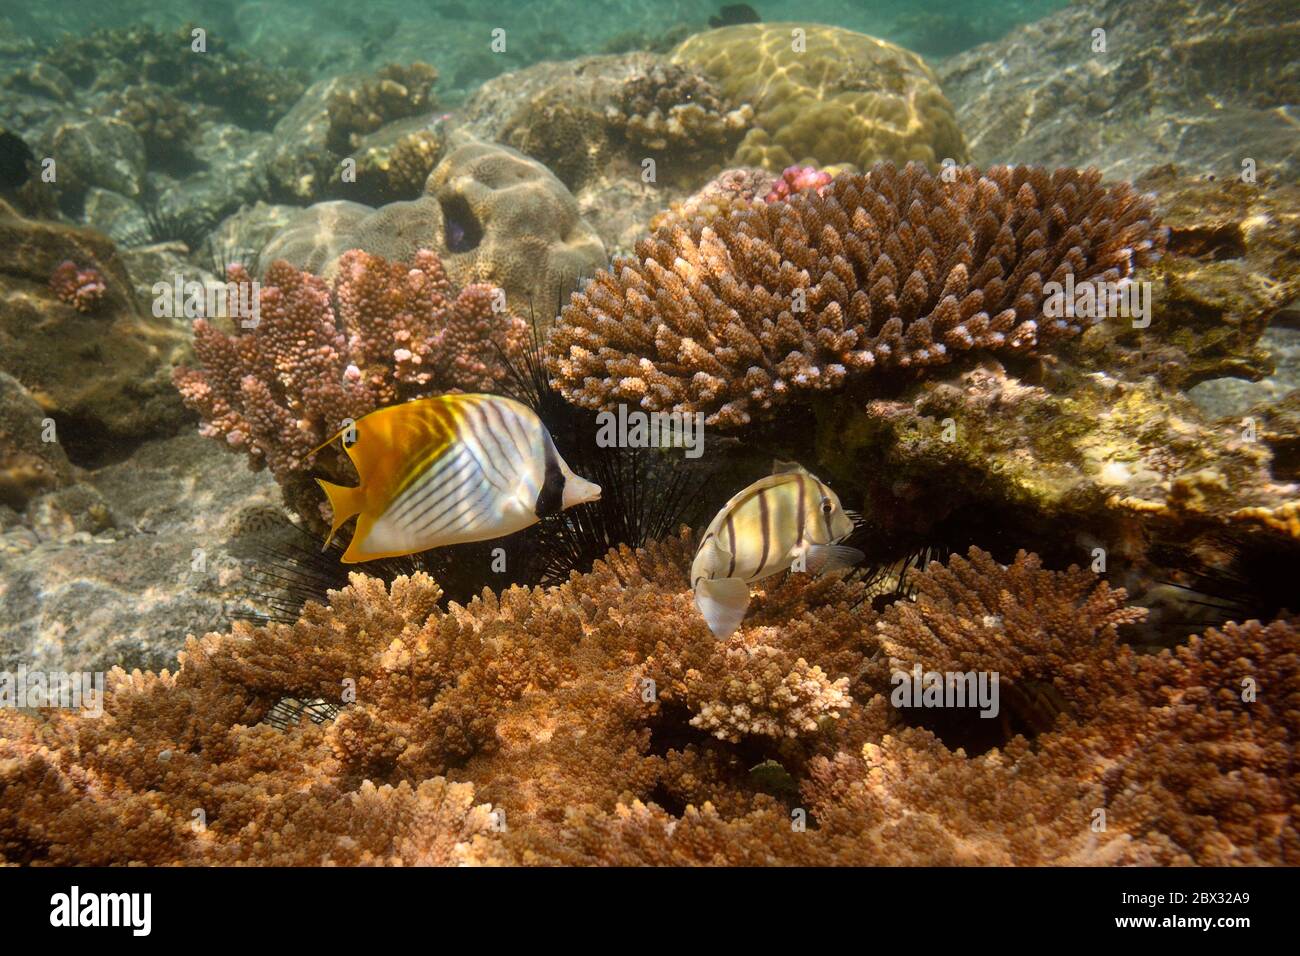 France, Reunion island (French overseas department), West Coast, Saint Gilles Les Bains (town of Saint-Paul), coral reef of Ermitage lagoon, threadfin butterflyfish (Chaetodon auriga) and sea urchins (underwater view) Stock Photo